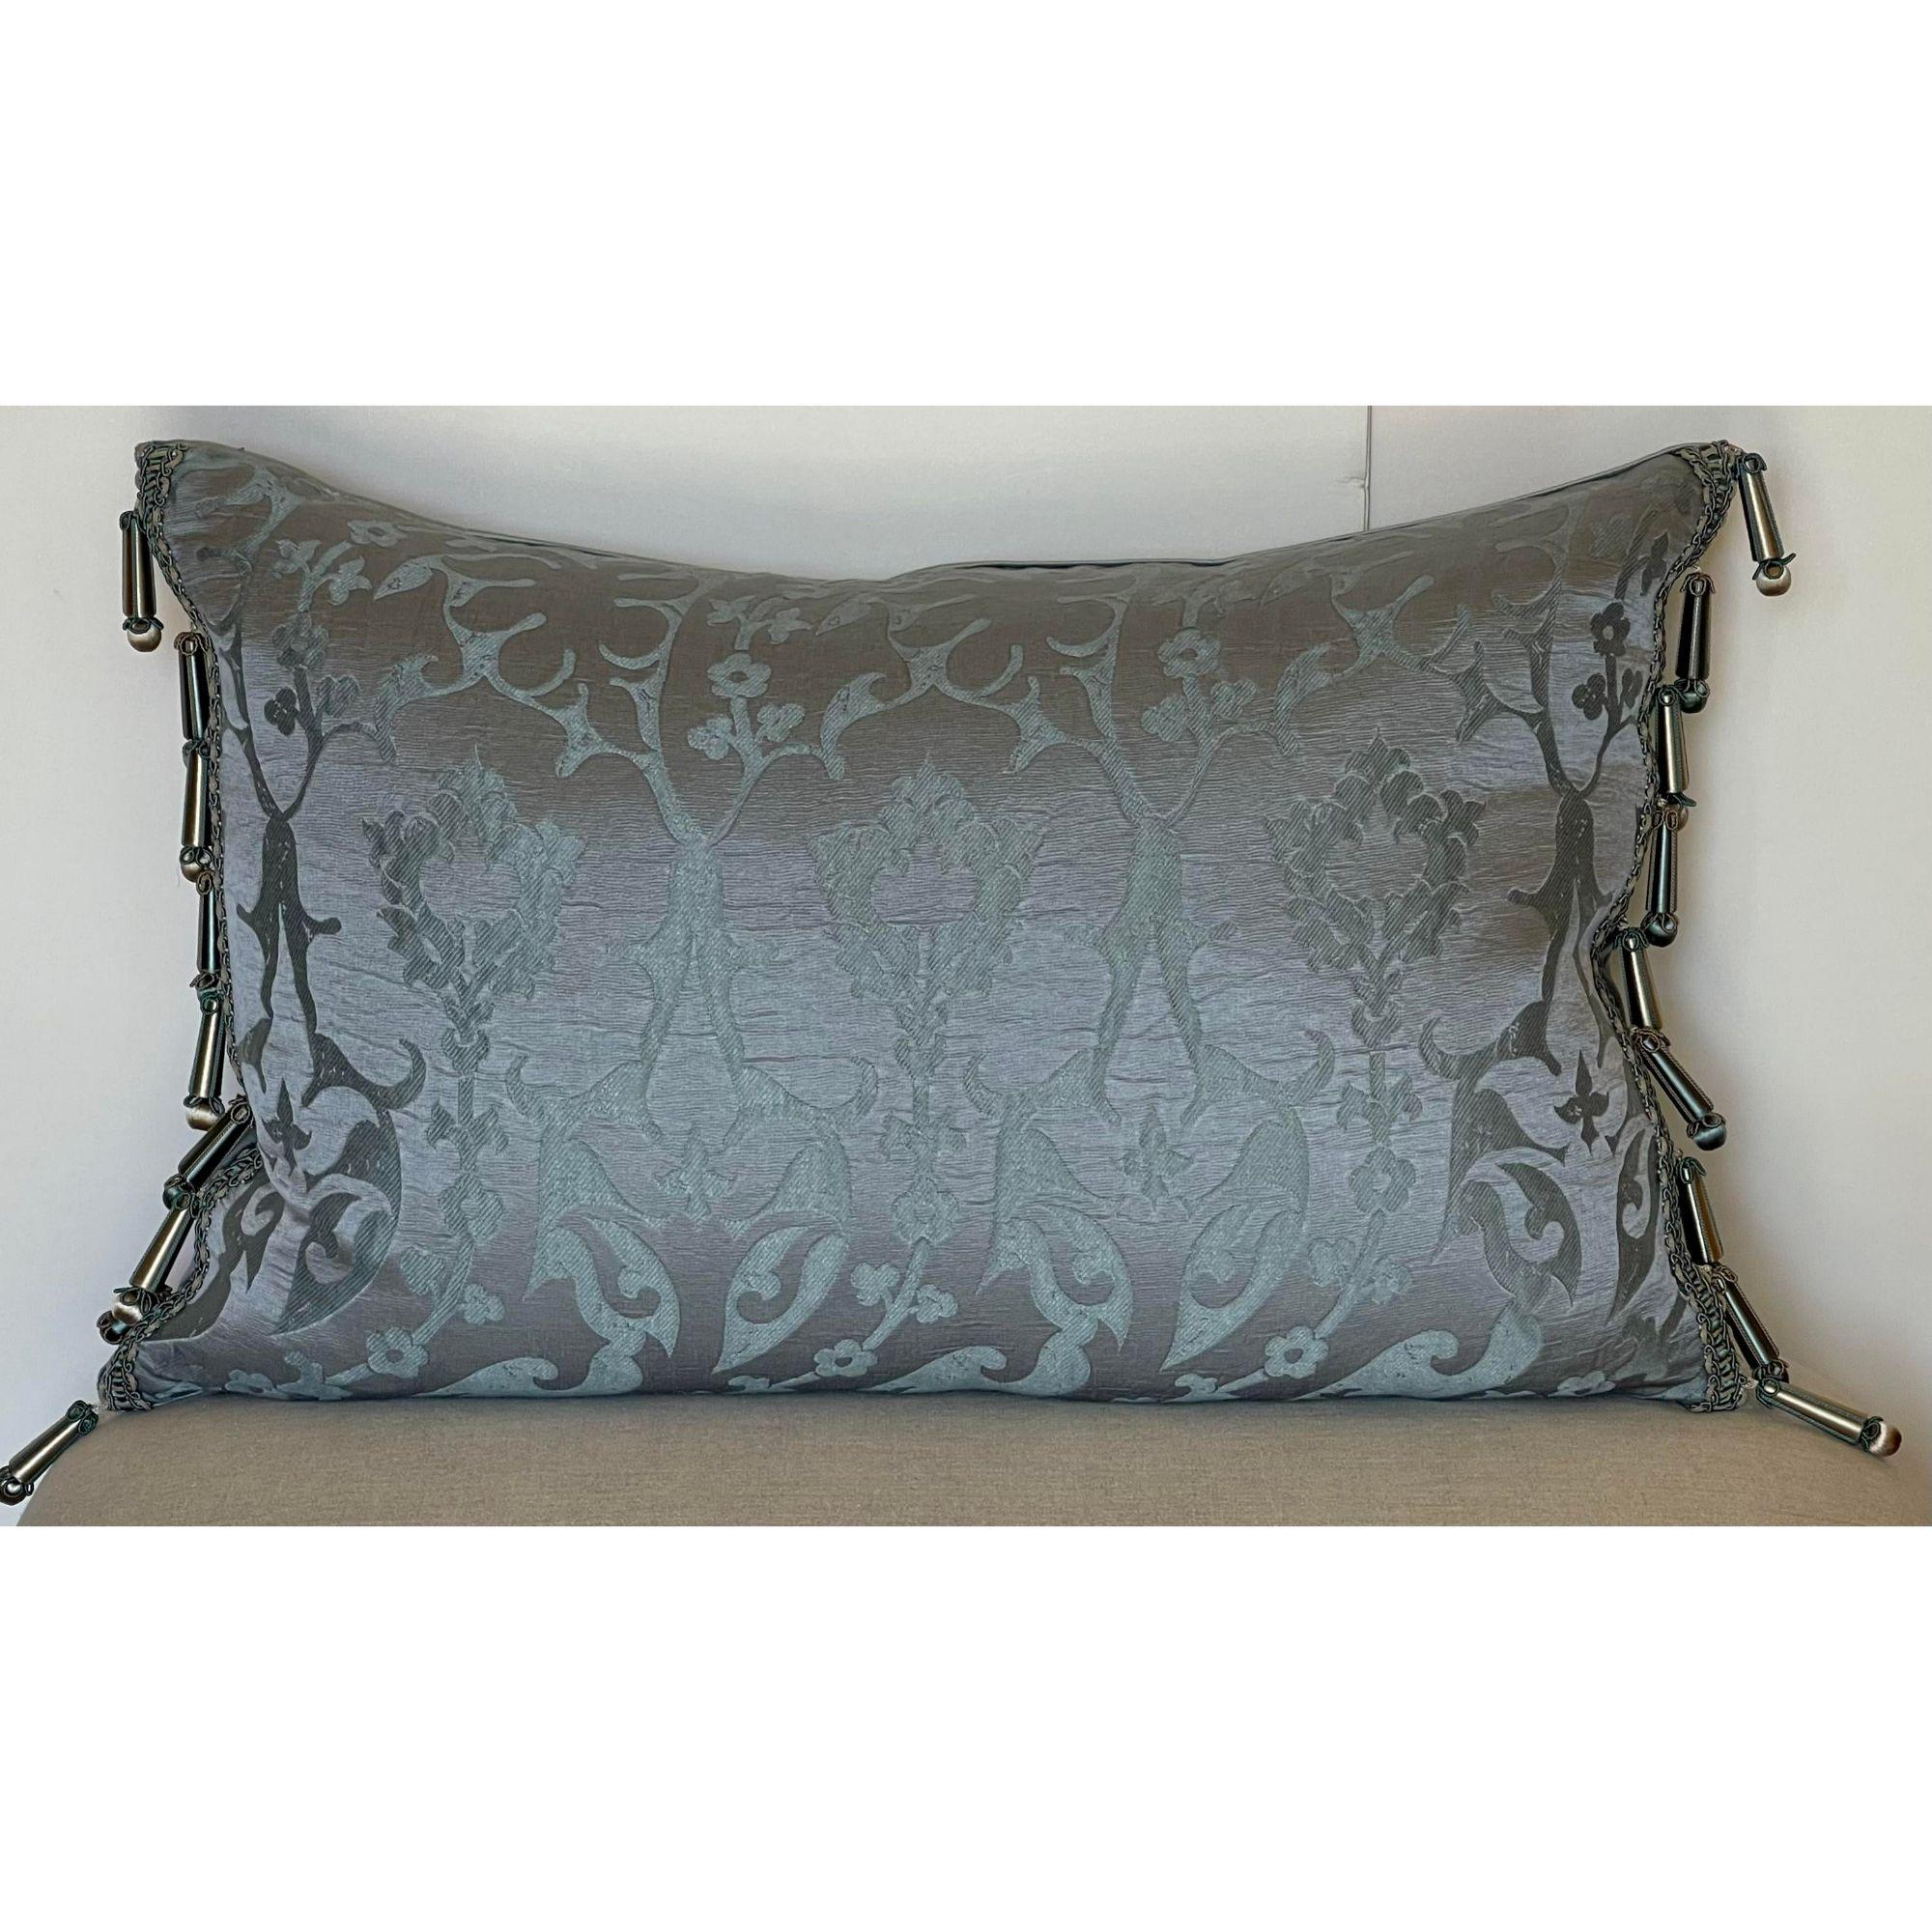 Decor De Paris down filled silk damask designer pillow
Priced Each

Additional information: 
Materials: Feather, Silk
Color: Blue
Brand: Randy Esada Designs for Prospr
Designer: Randy Esada Designs for Prospr
Period: 2020s
Styles: French,